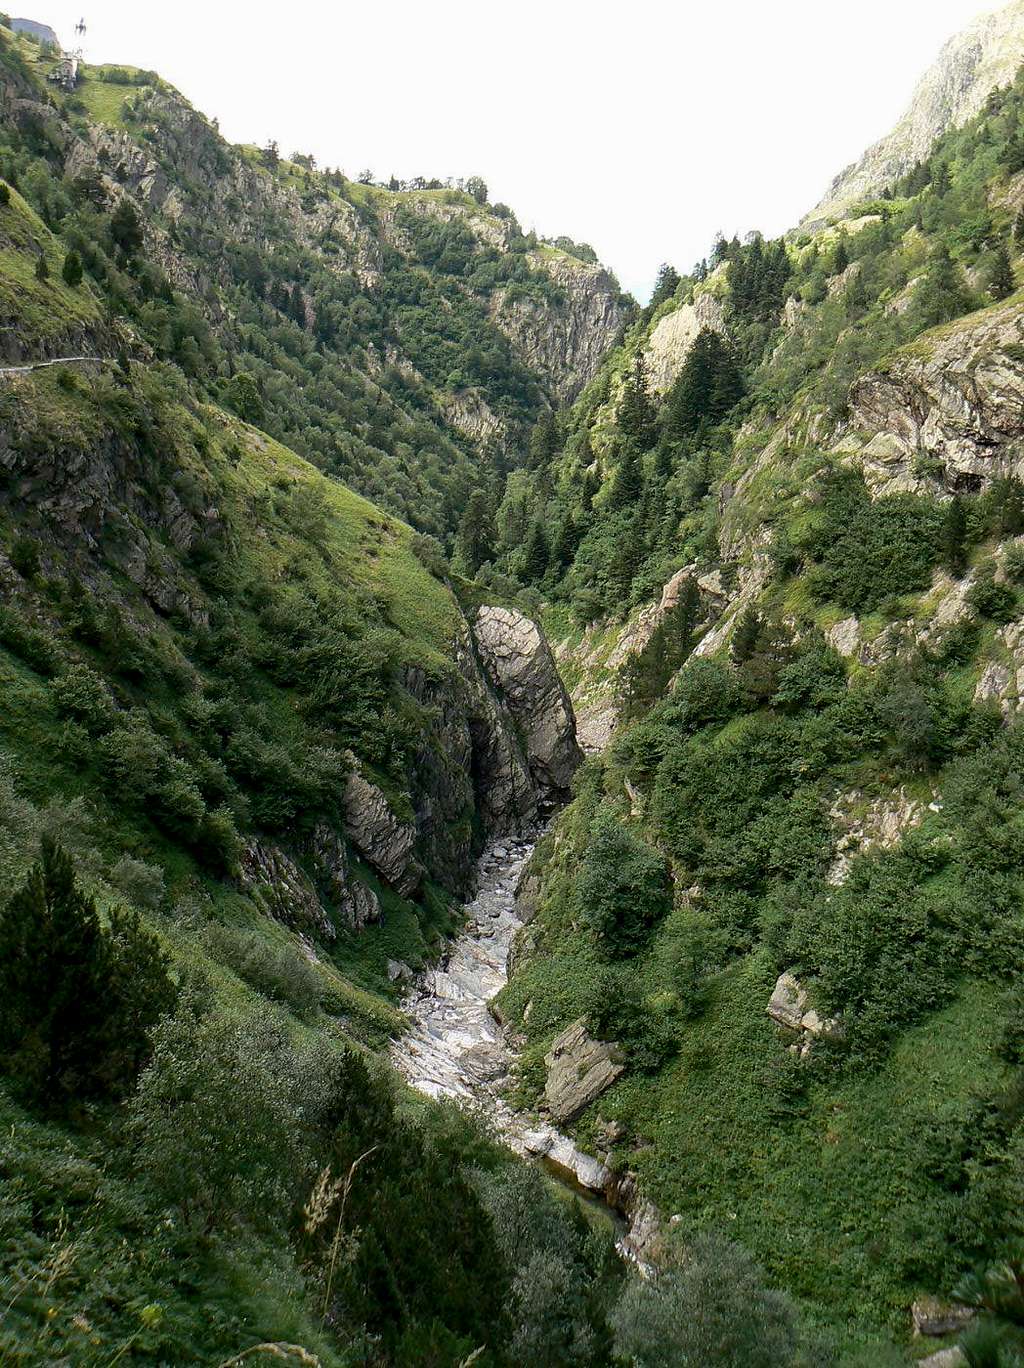 The Clarabide gorges